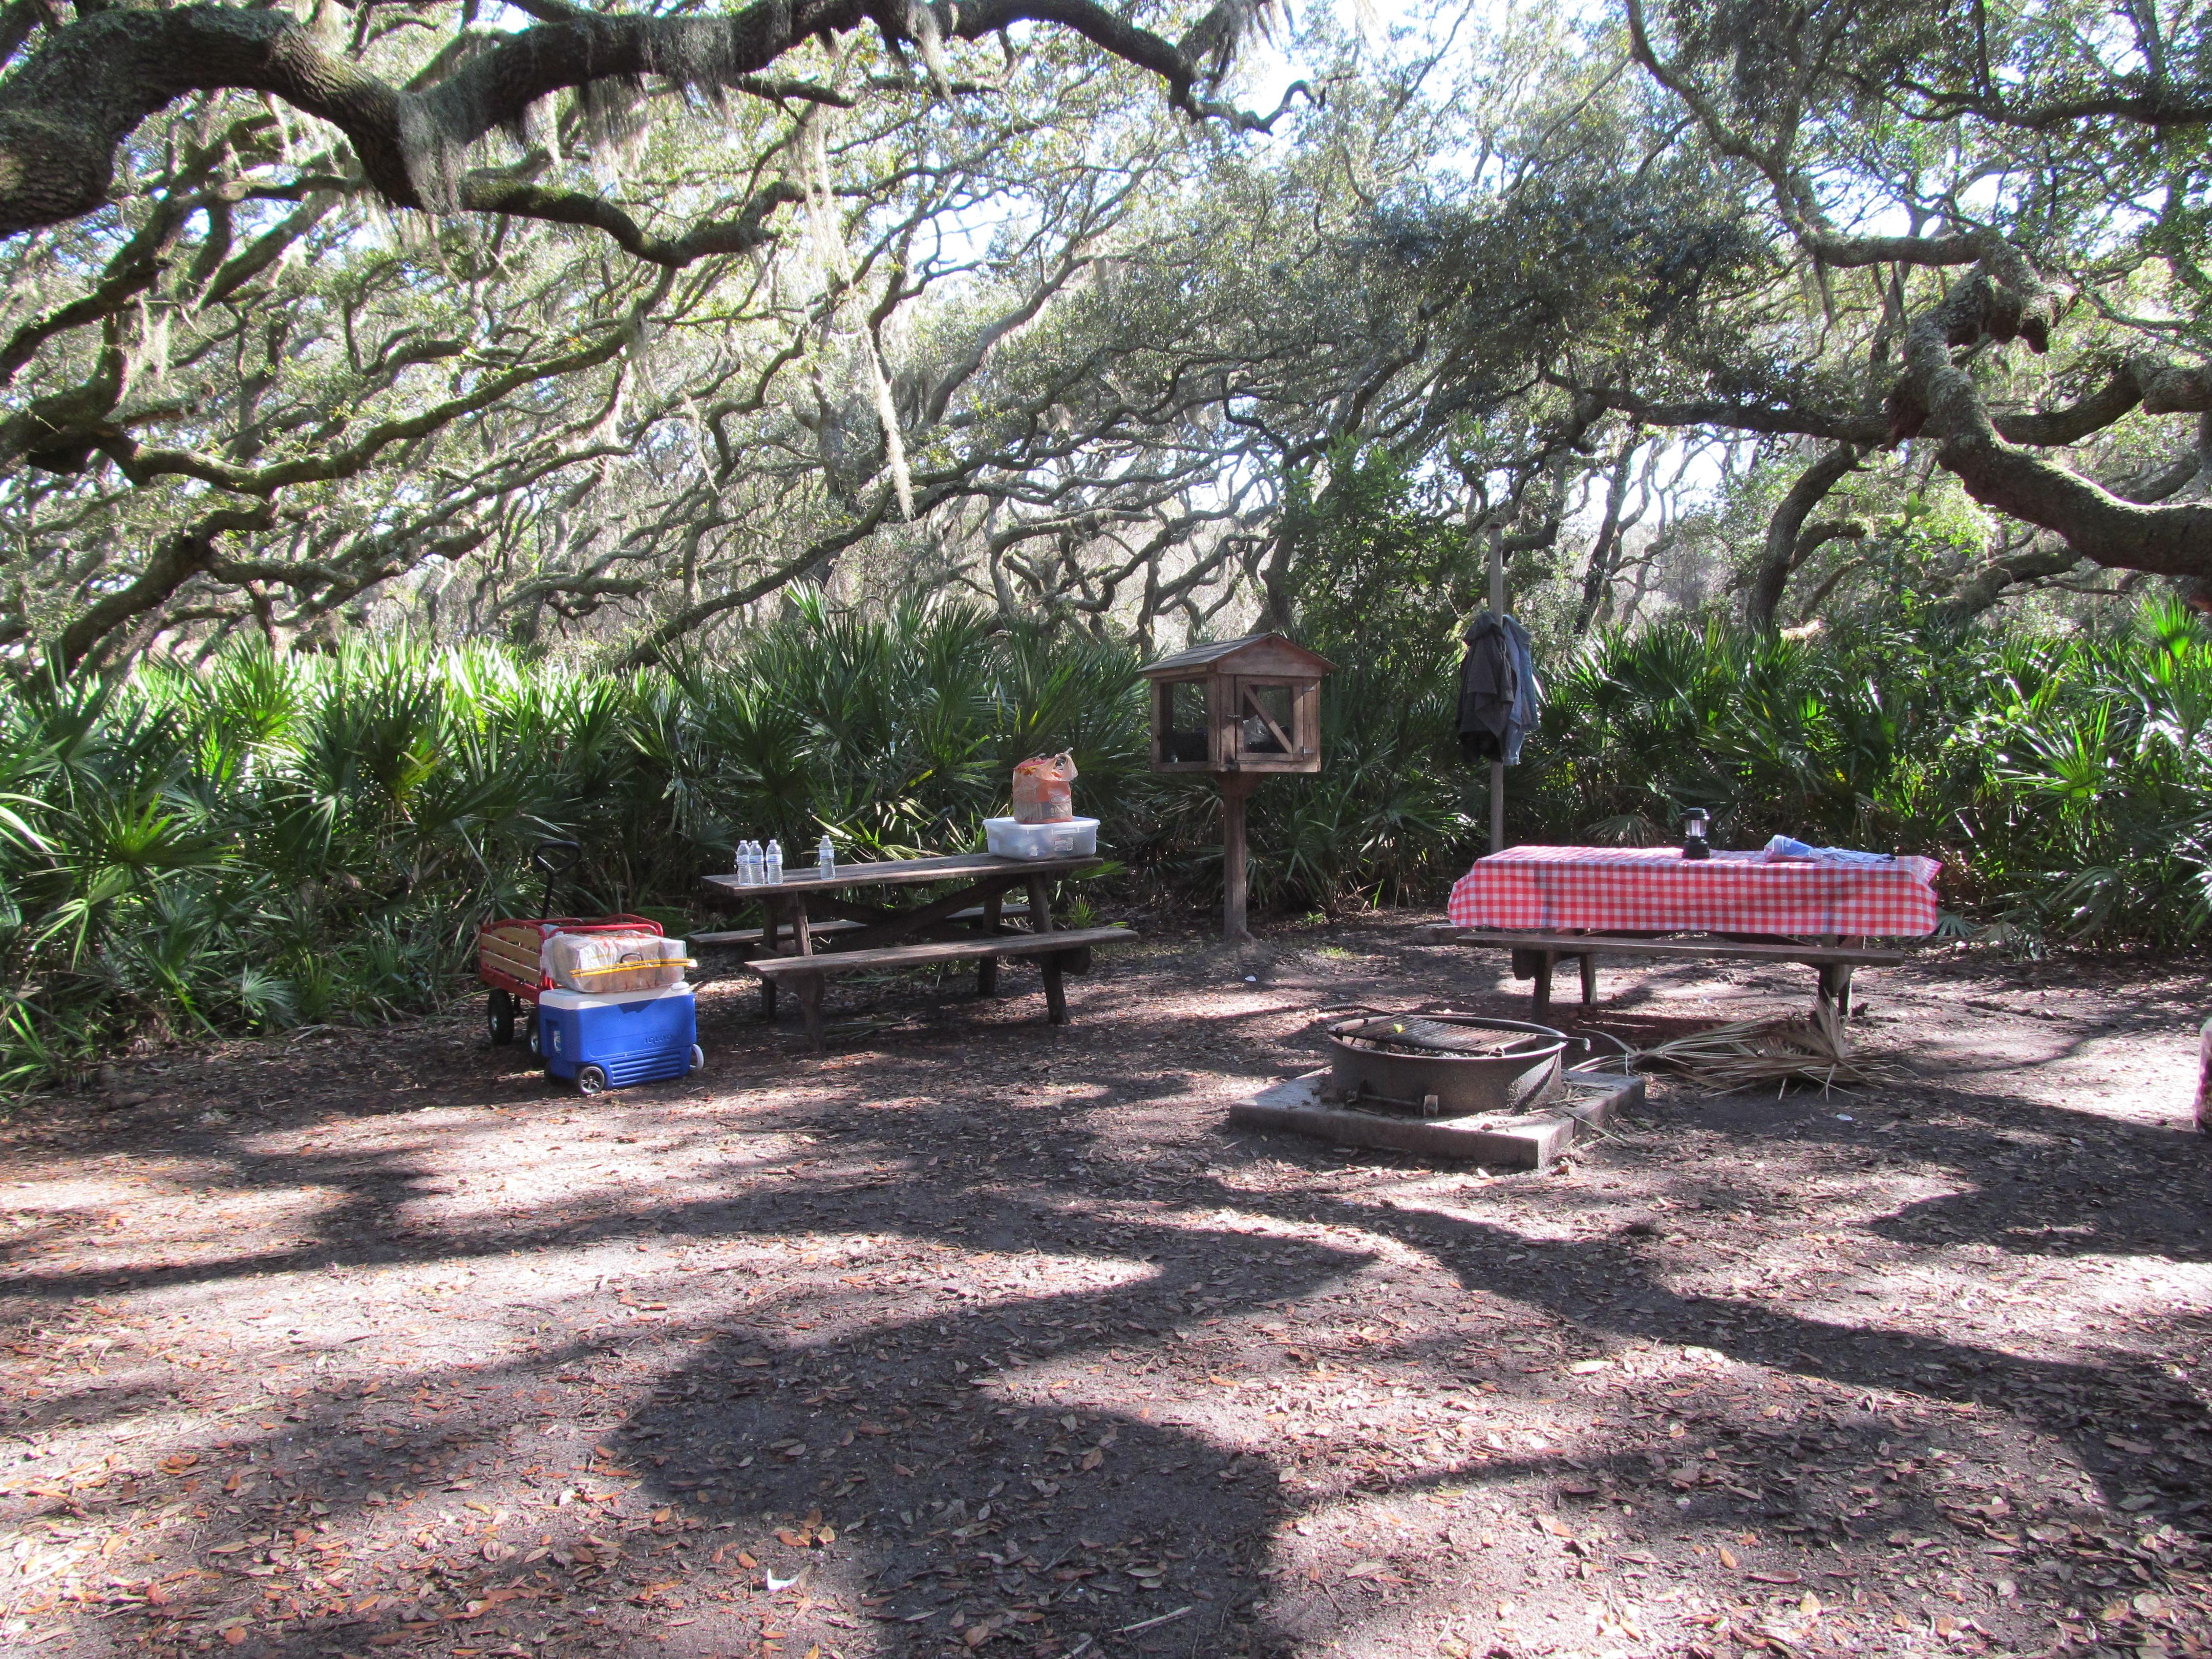 campsite with picnic table, food cage, and fire ring under live oak trees